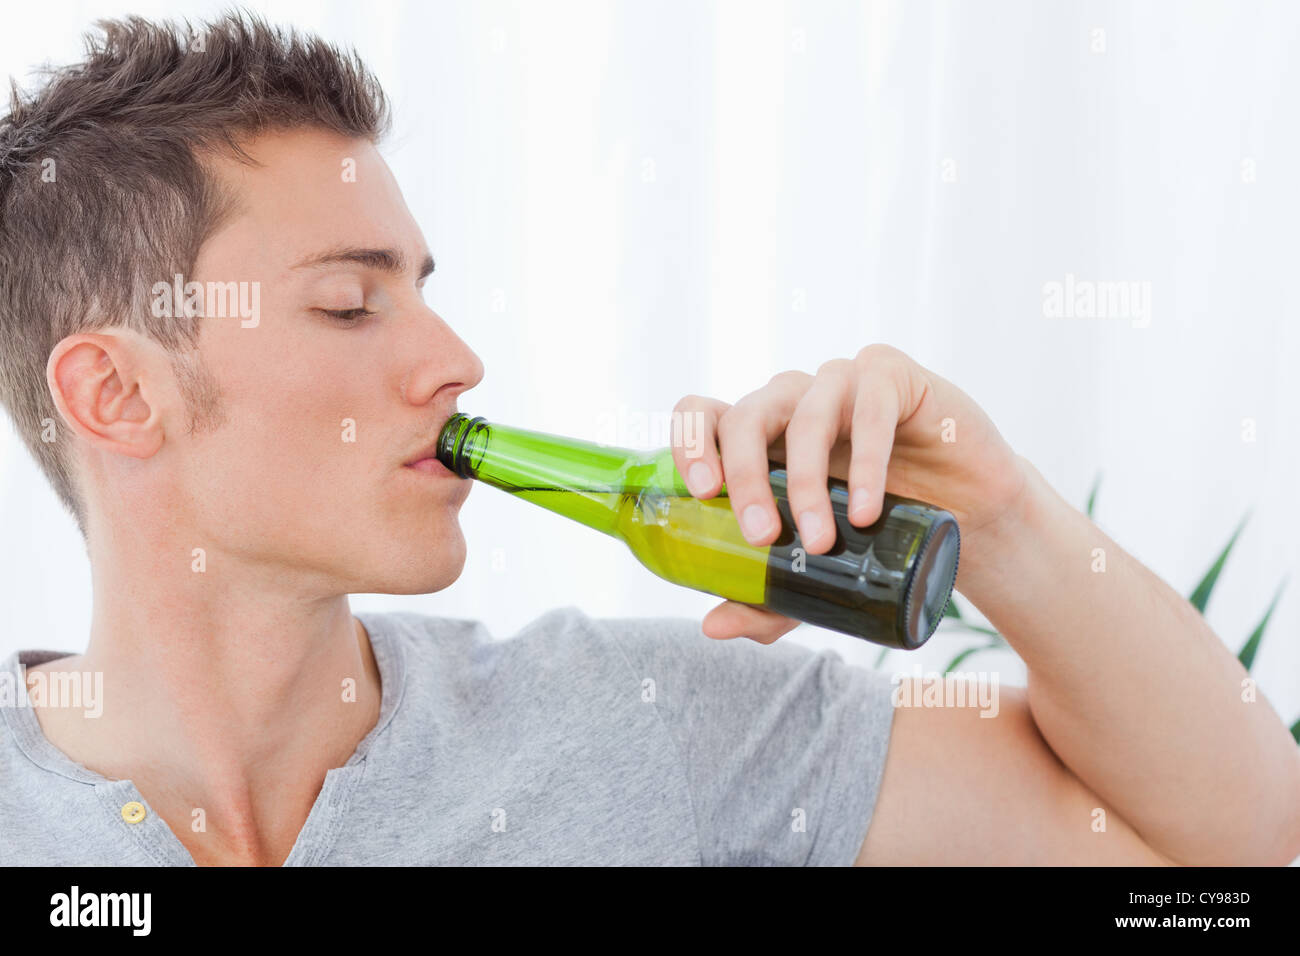 a-handsome-man-drinking-some-beer-CY983D.jpg